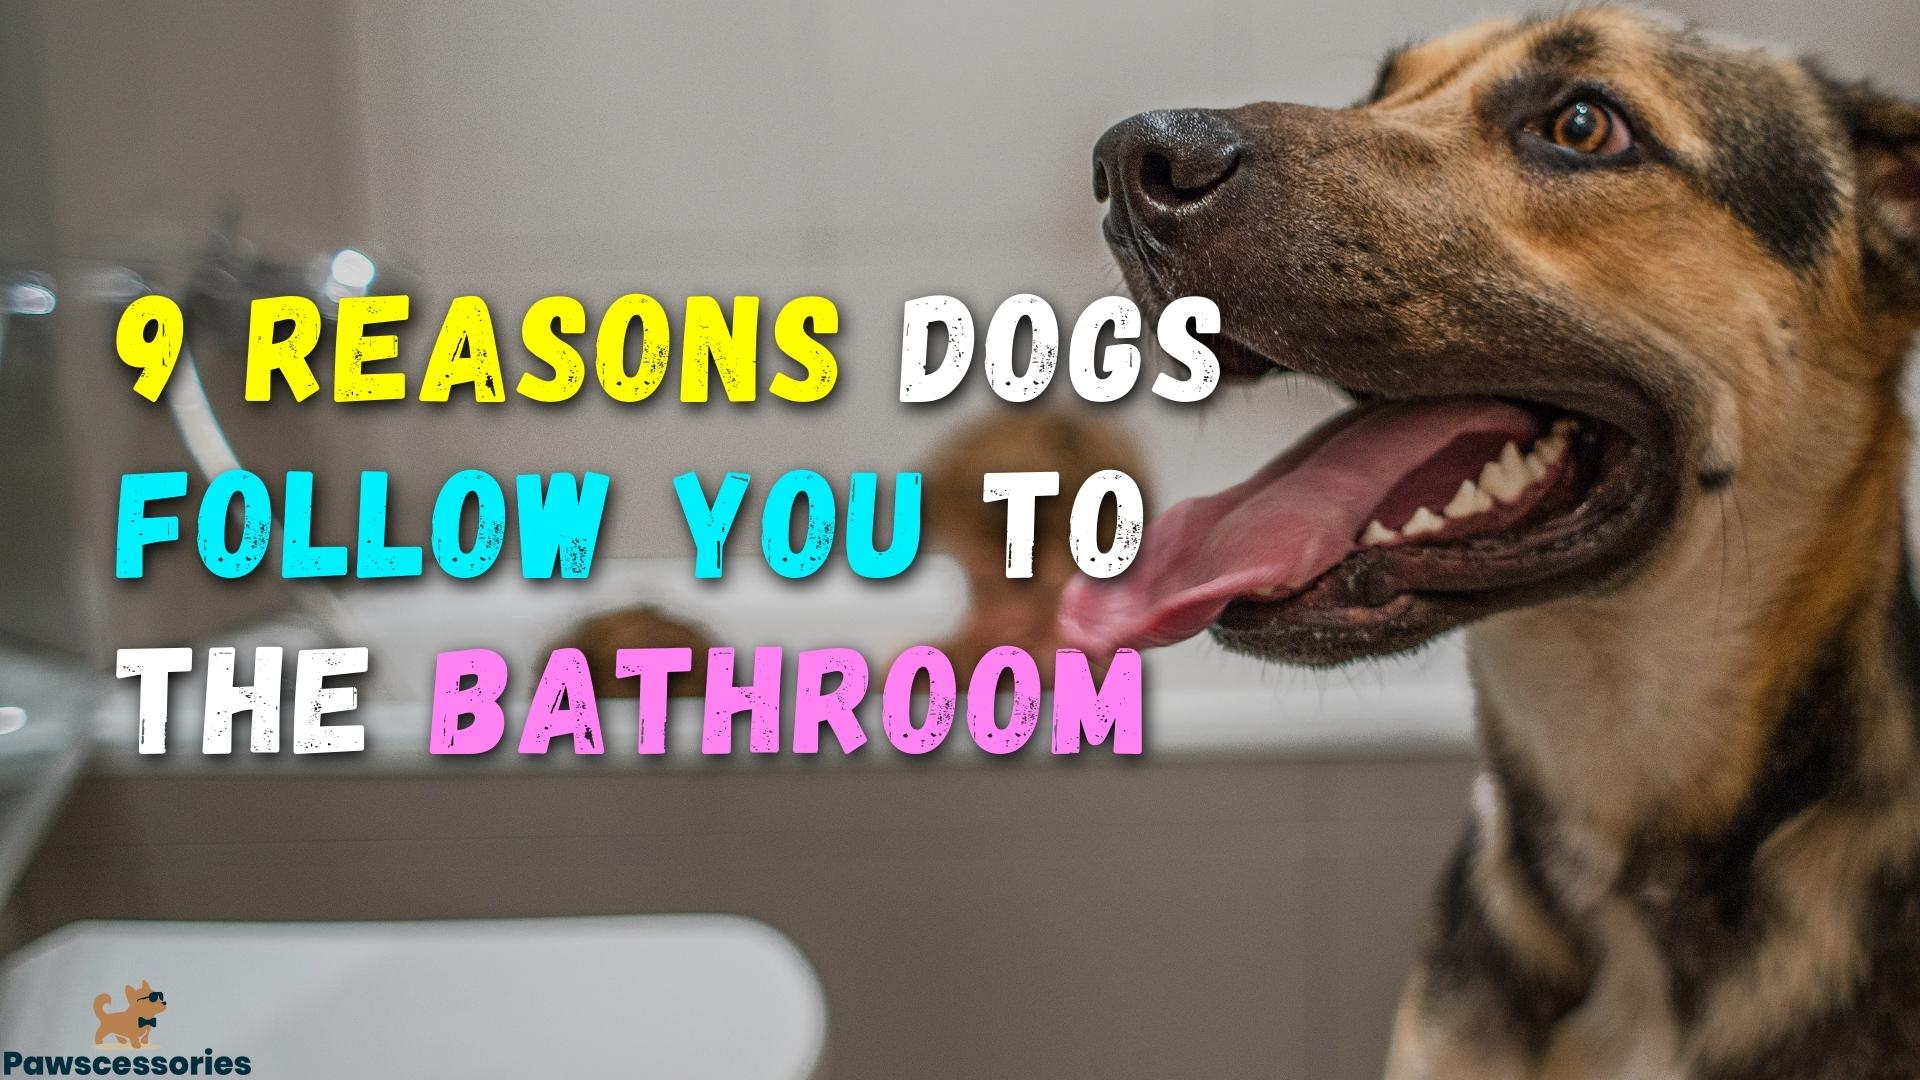 9 Reasons Dogs Follow You To The Bathroom